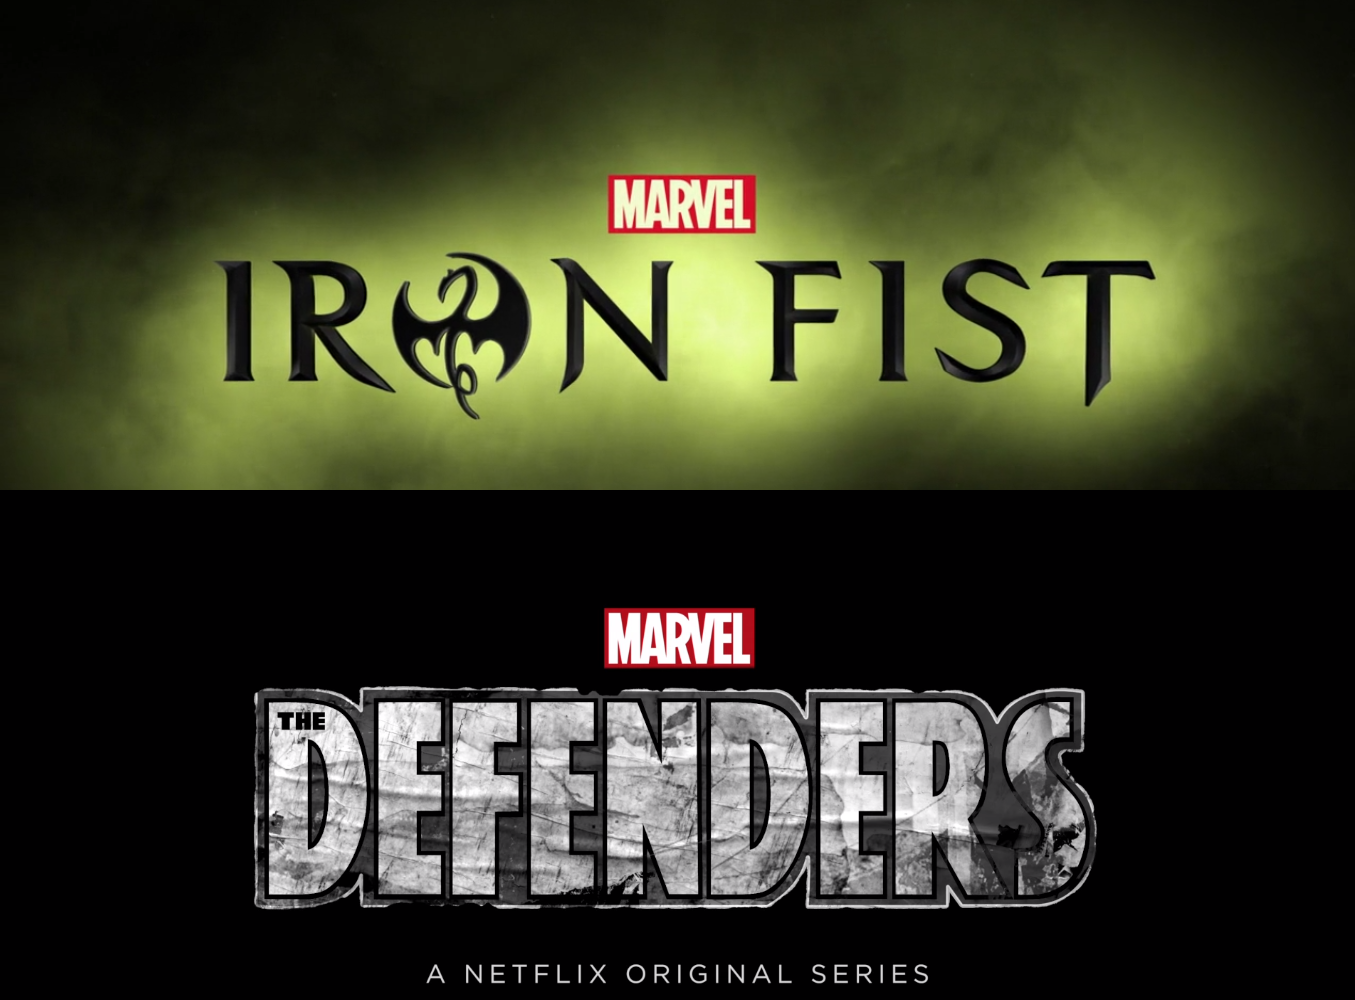 Iron fist and other such brands